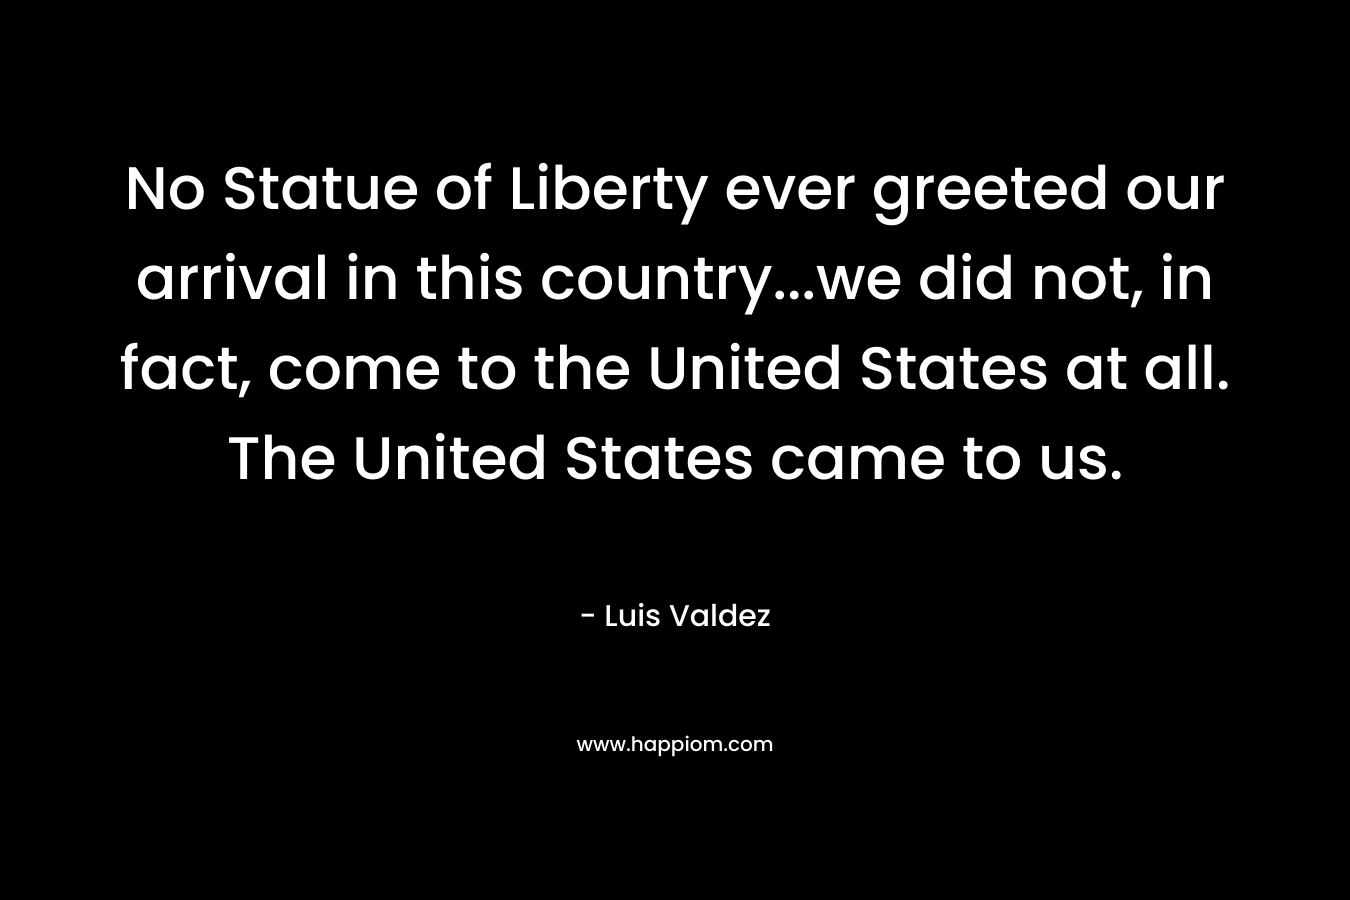 No Statue of Liberty ever greeted our arrival in this country...we did not, in fact, come to the United States at all. The United States came to us.